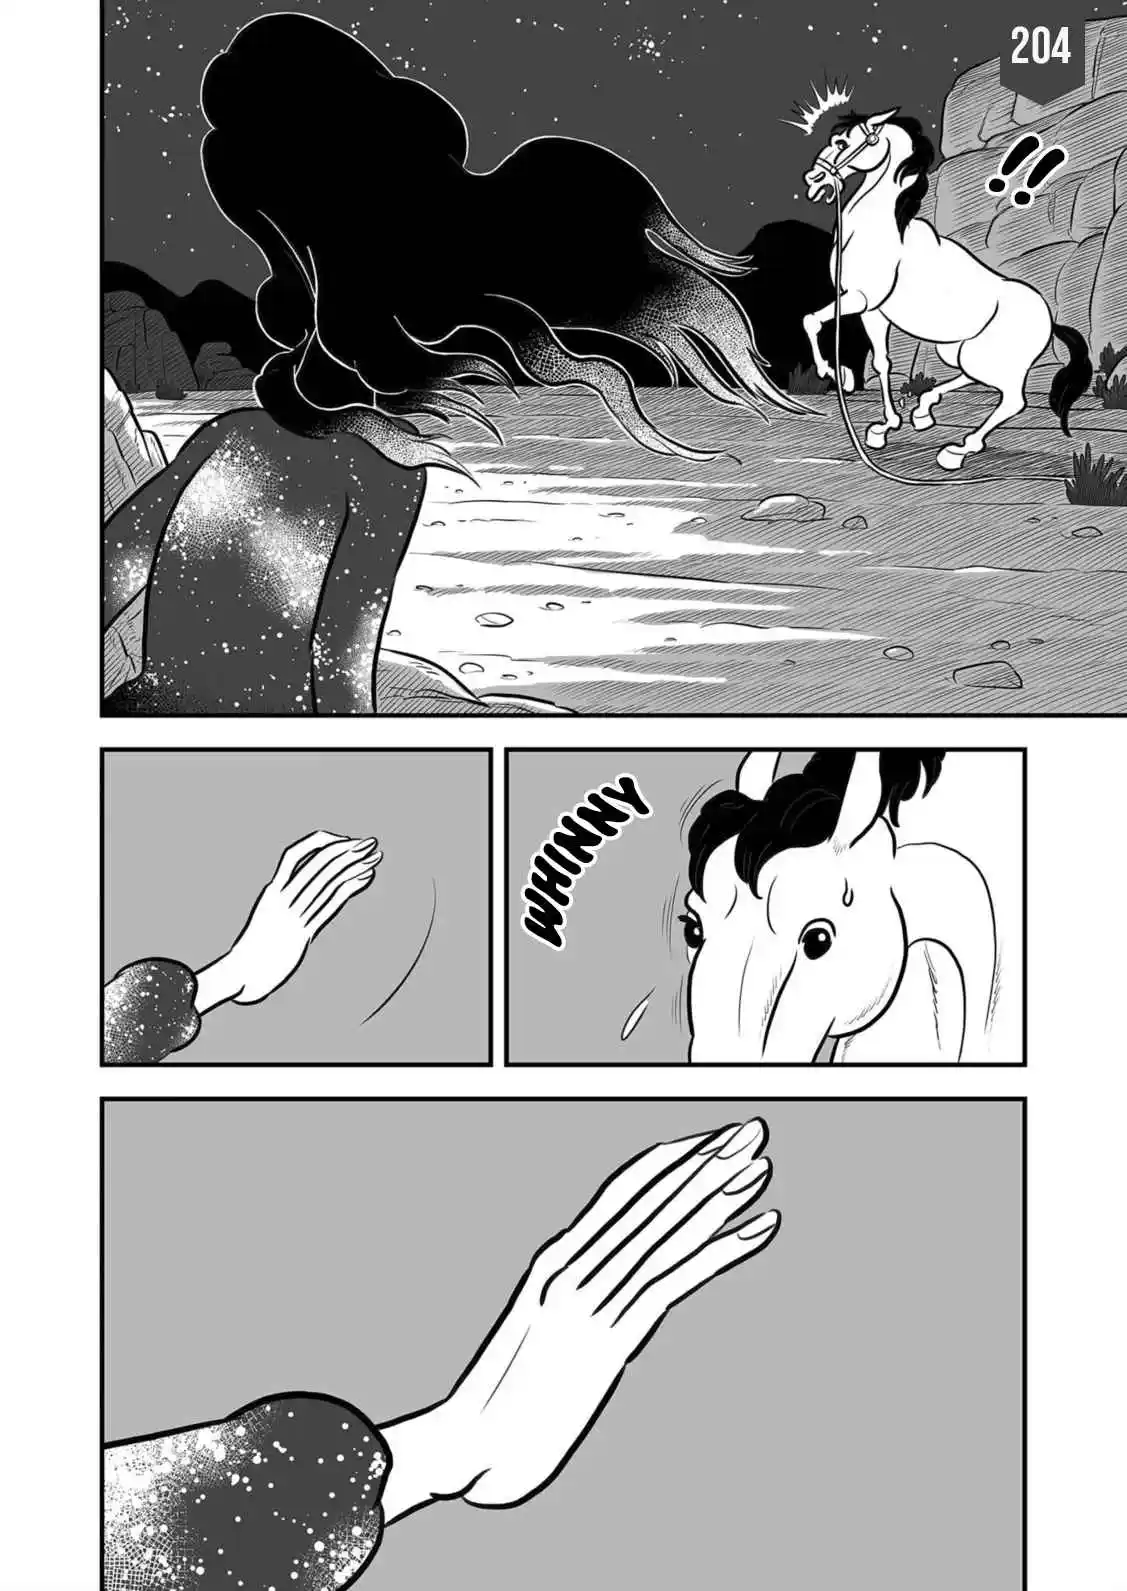 Clasificacion De Reyes: Chapter 204 - Page 1